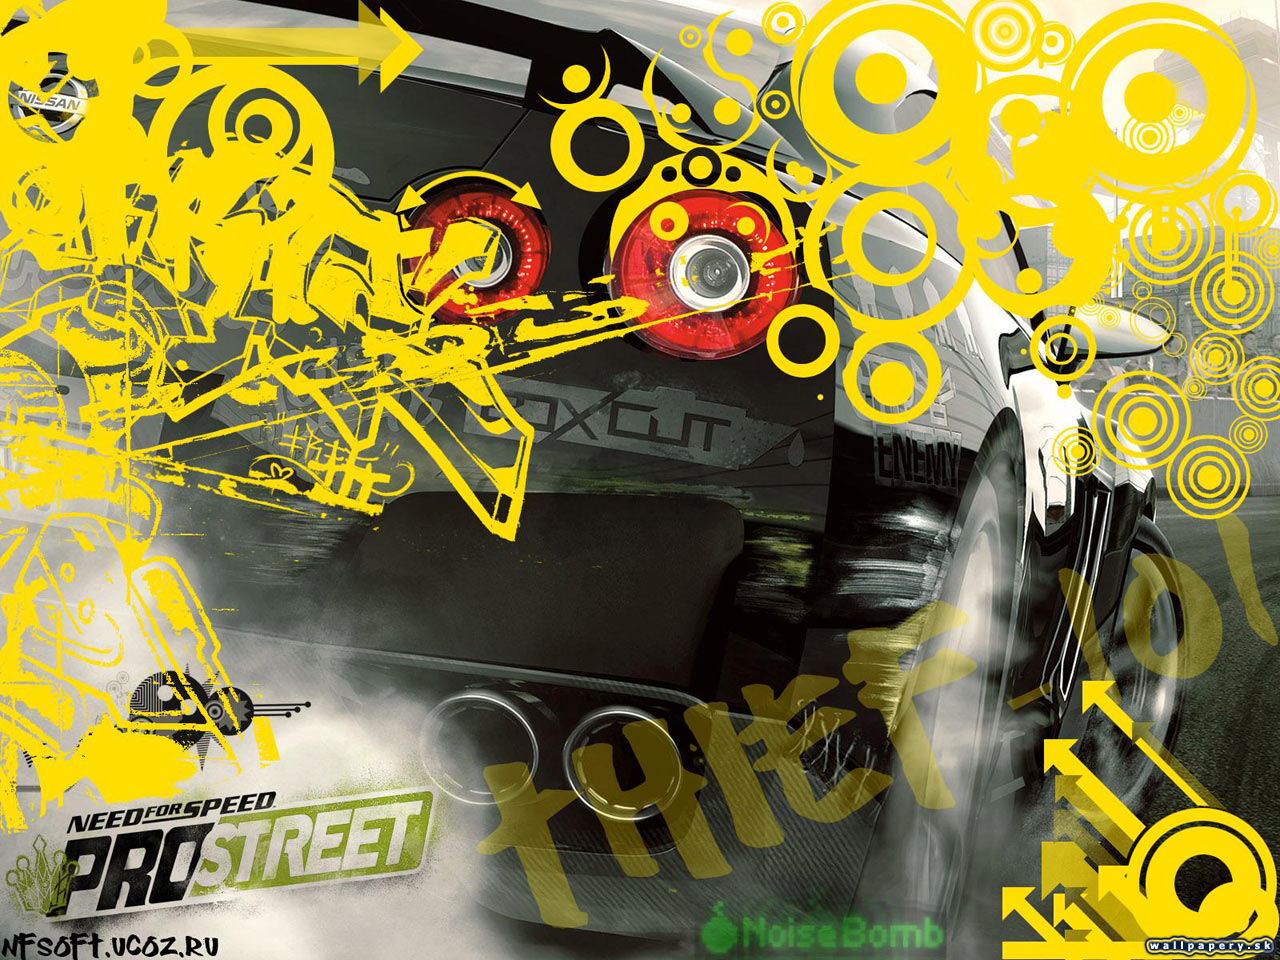 Need for Speed: ProStreet - wallpaper 19